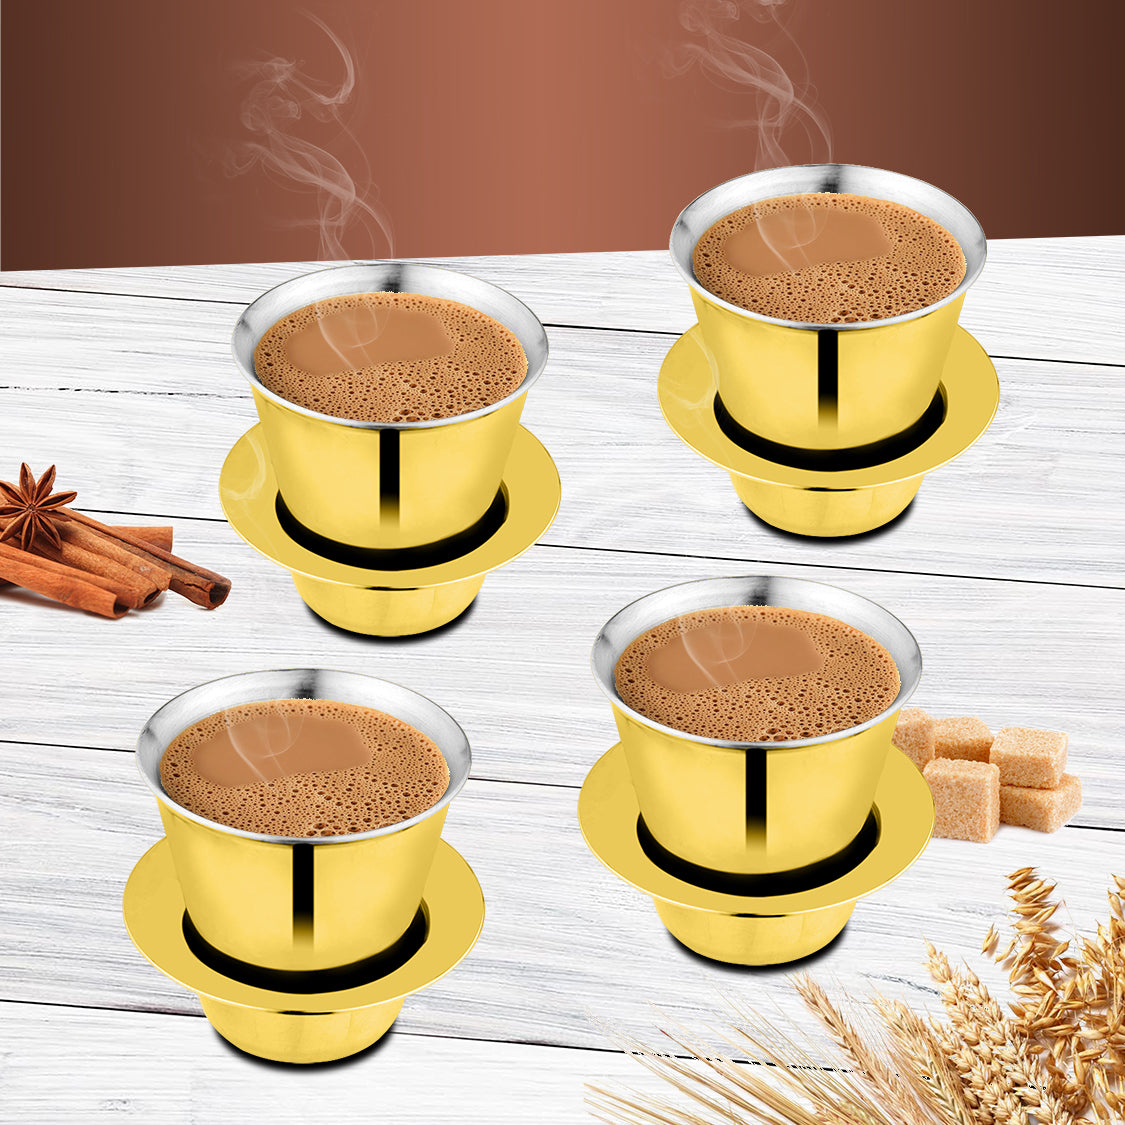 Stainless Steel 4 PCS Double Wall Coffee Dabra In Tumbler with Gold PVD Coating Congo